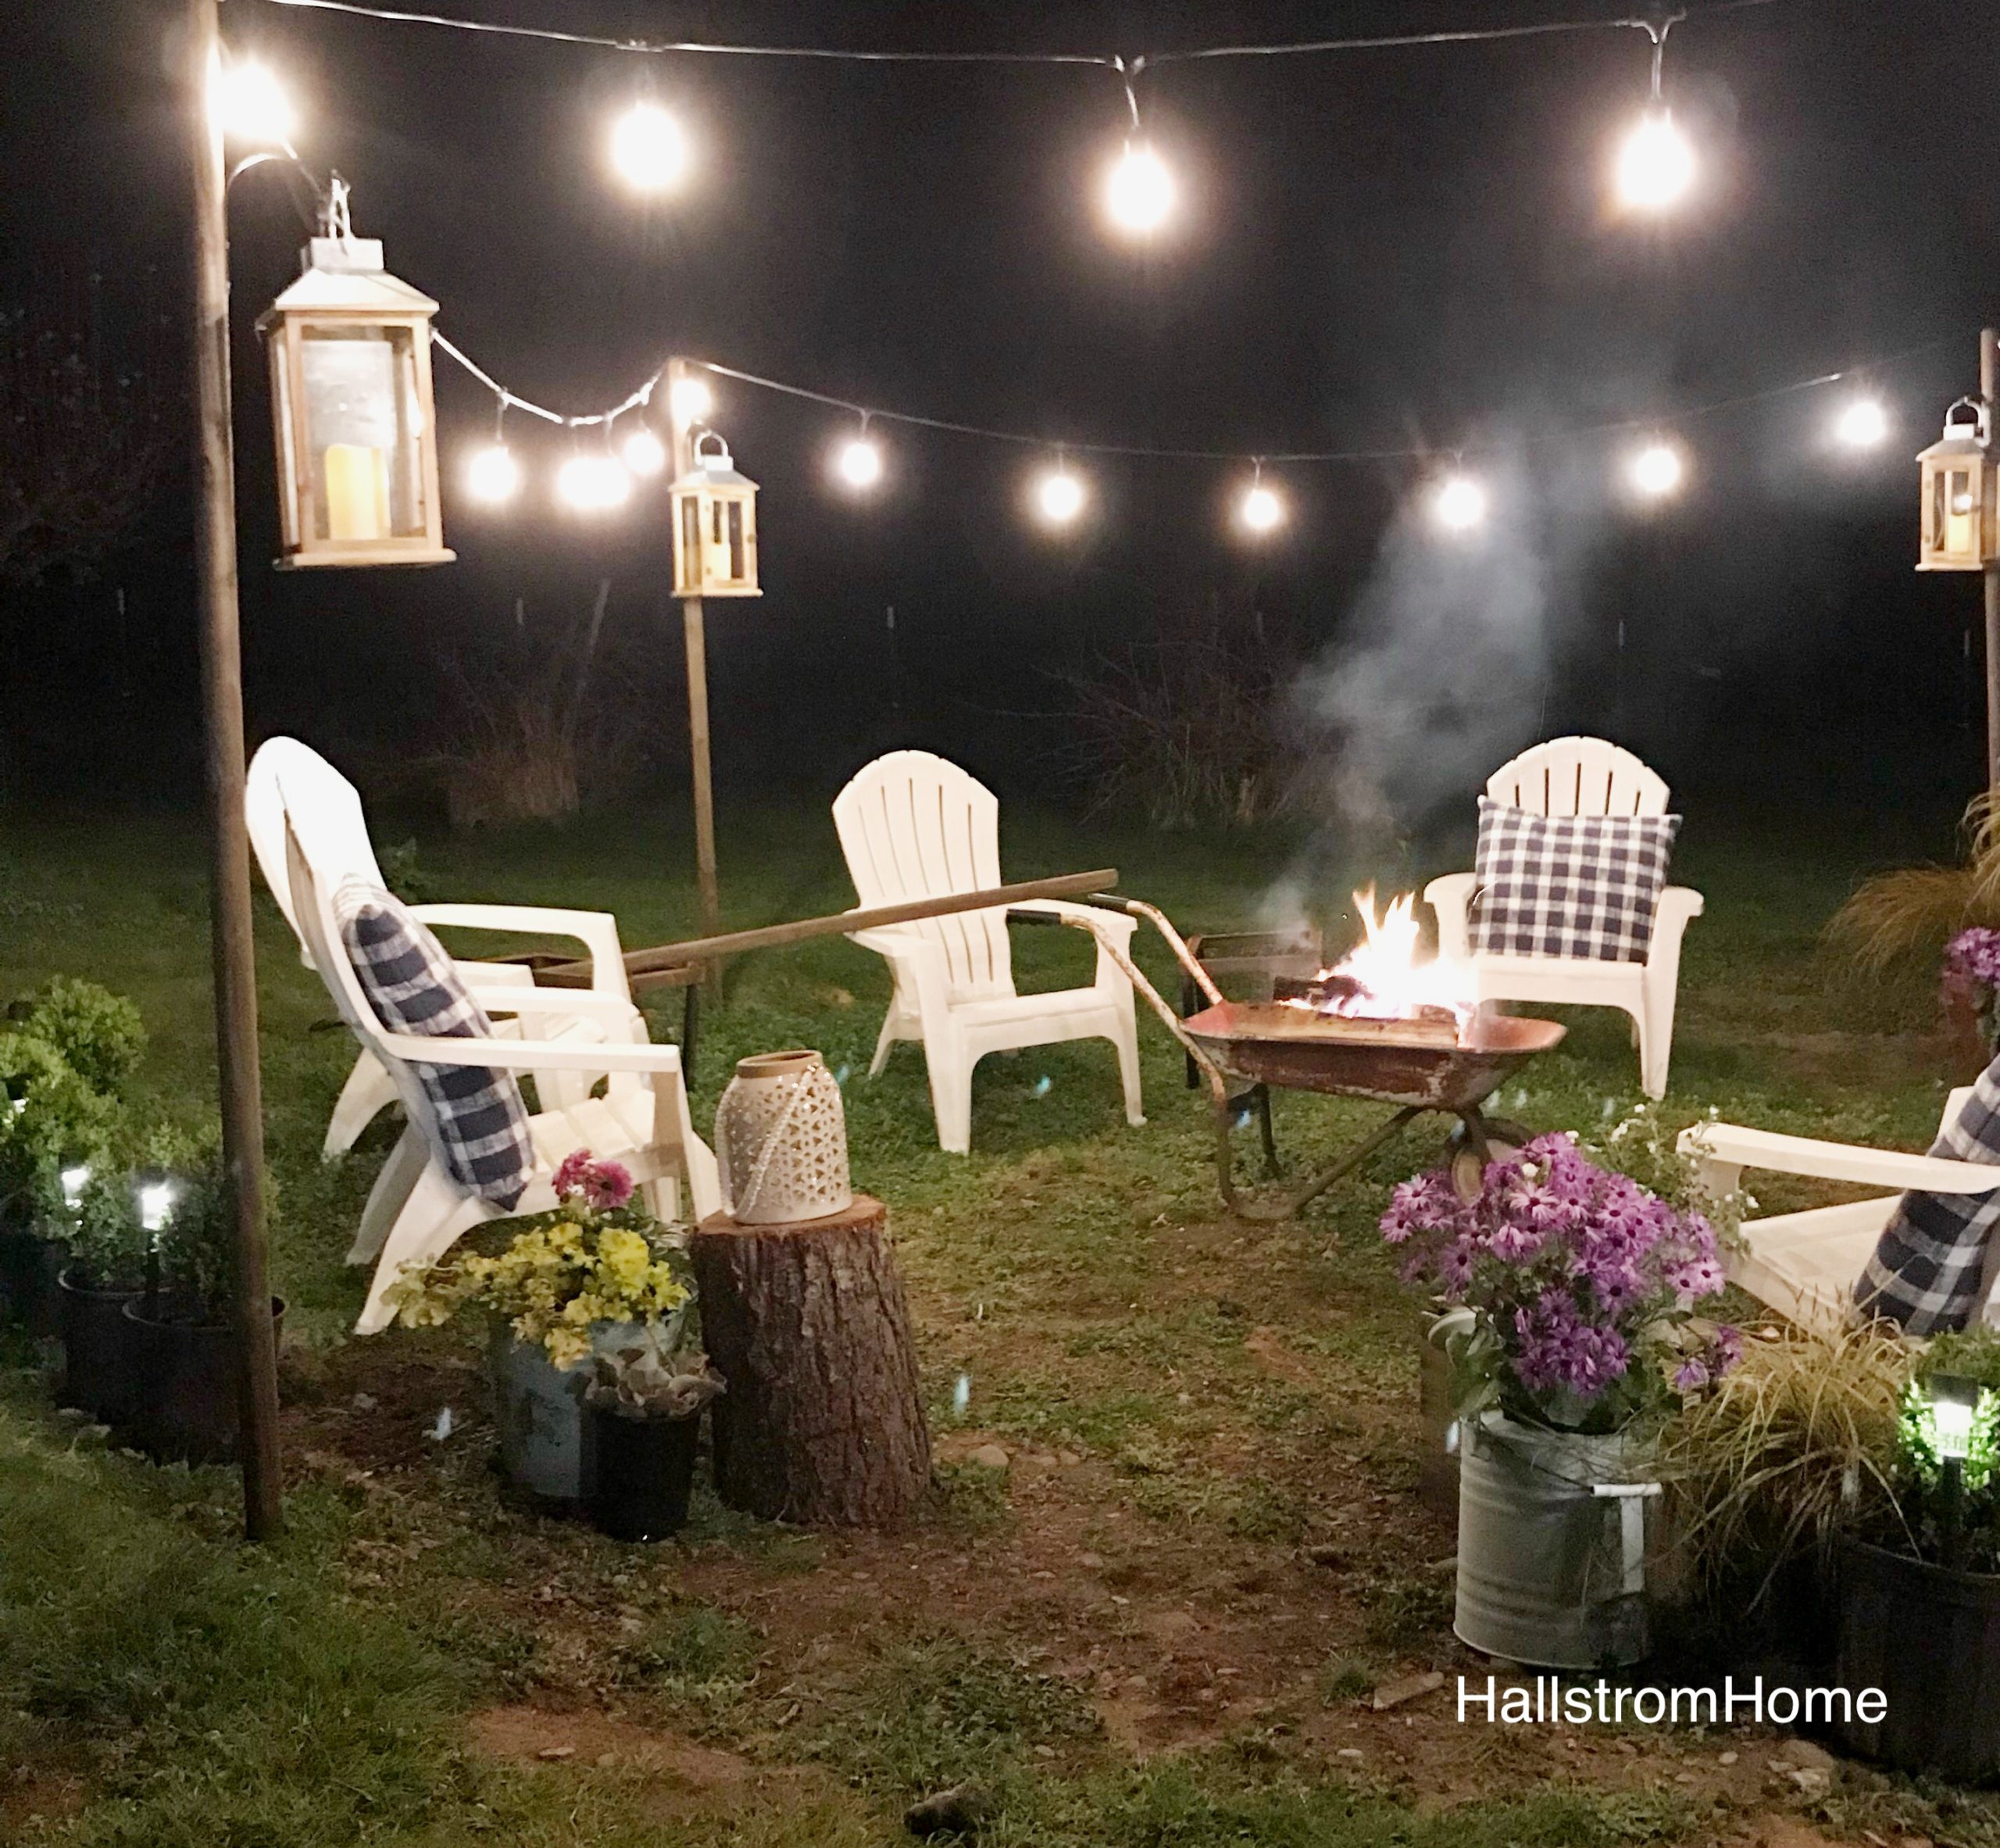 The Girl Who Built a Beautiful Fire Pit white lawn chairs around heelbarrow lit fire. lights draped around border seating area